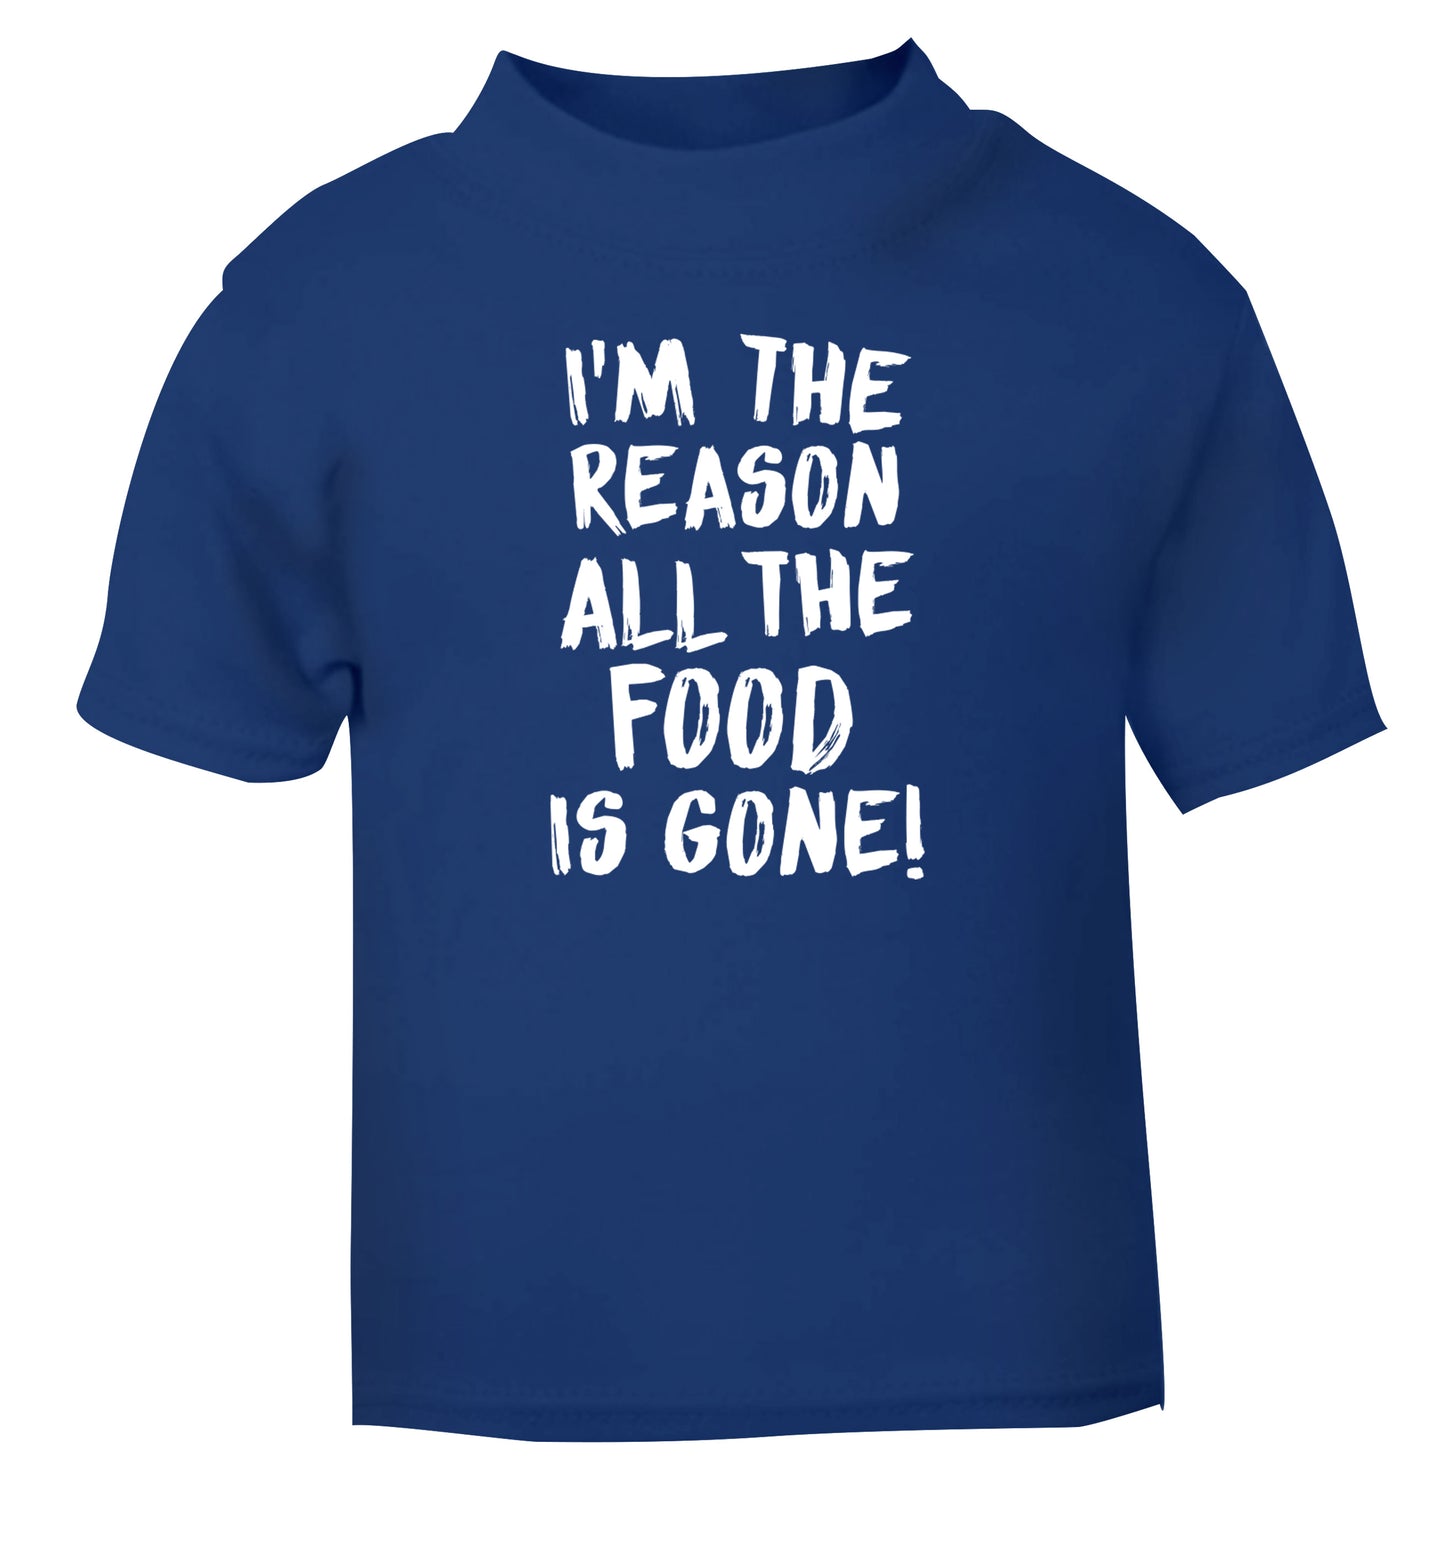 I'm the reason why all the food is gone blue Baby Toddler Tshirt 2 Years